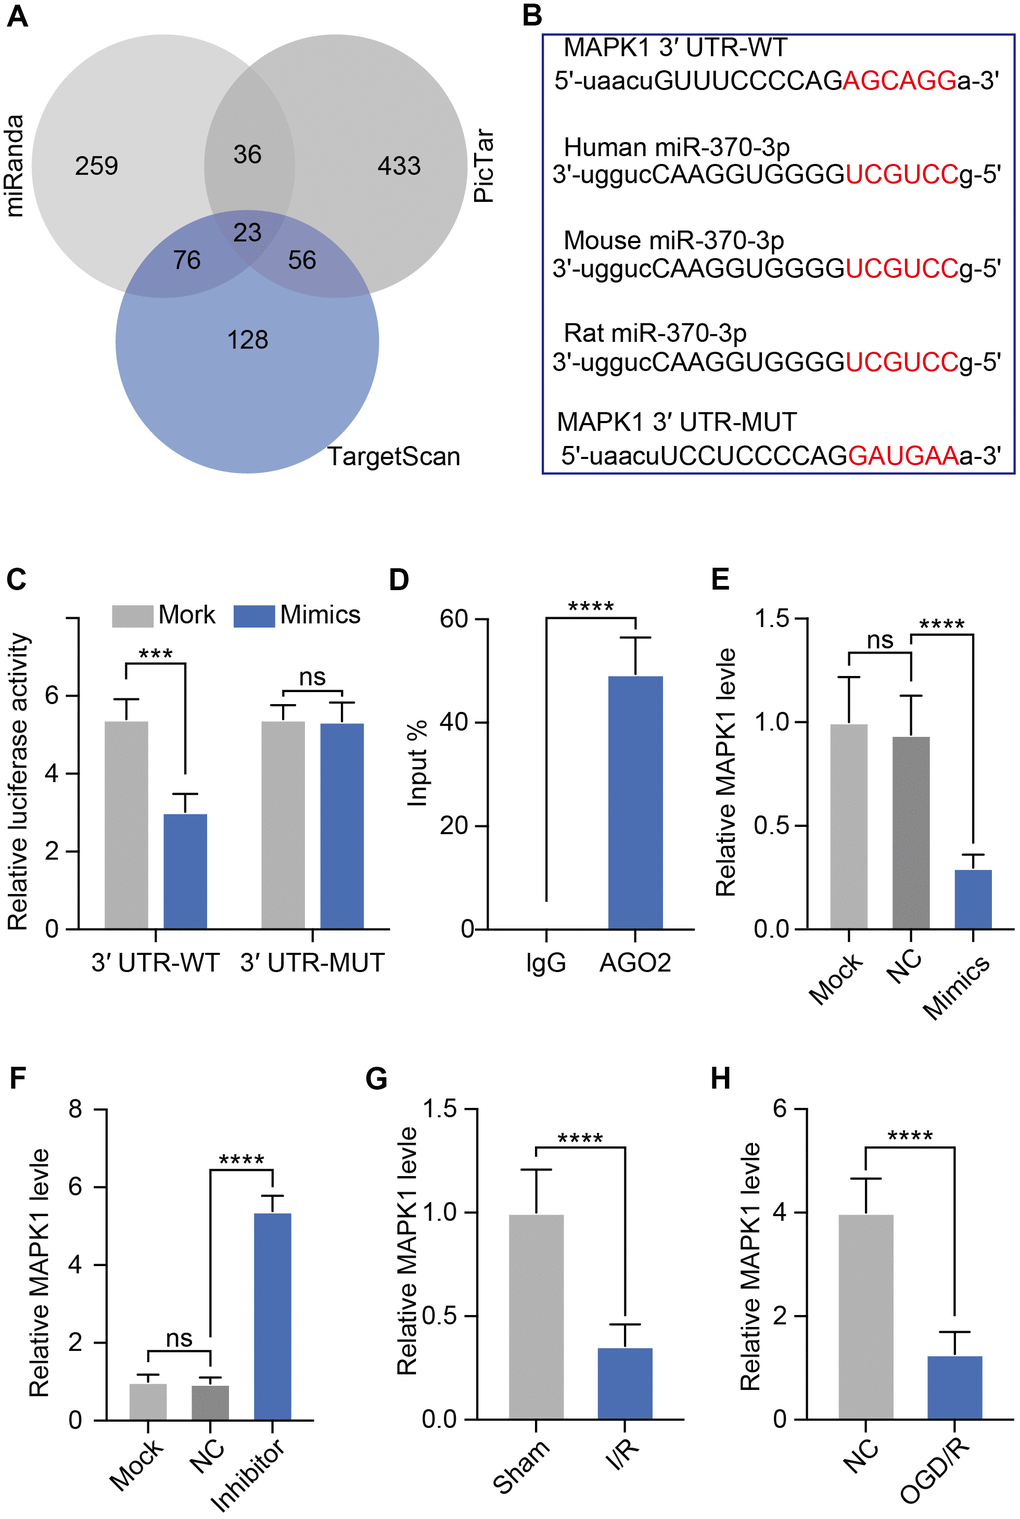 miR-370-3p directly targets MAPK1. (A) Candidate genes from three databases were shown in a Venn diagram. (B) Luciferase reporter constructs with WT or mutant (MUT) MAPK1 3'-UTR binding sites are shown schematically. (C) Following co-transfection of miR-370-3p mimics with WT or MUT reporter plasmids, luciferase activity in bEND.3 cells was assessed. (D) Interactions between MAPK1 and miR-370-3p were tested using RNA immunoprecipitation. (E, F) Relative MAPK1 expression in bEND.3 cells with miR-370-3p mimics or miR-370-3p inhibitor treatment. (G, H) Levels of MAPK1 in both cerebral I/R rats and OGD/R in bEND.3 cells.